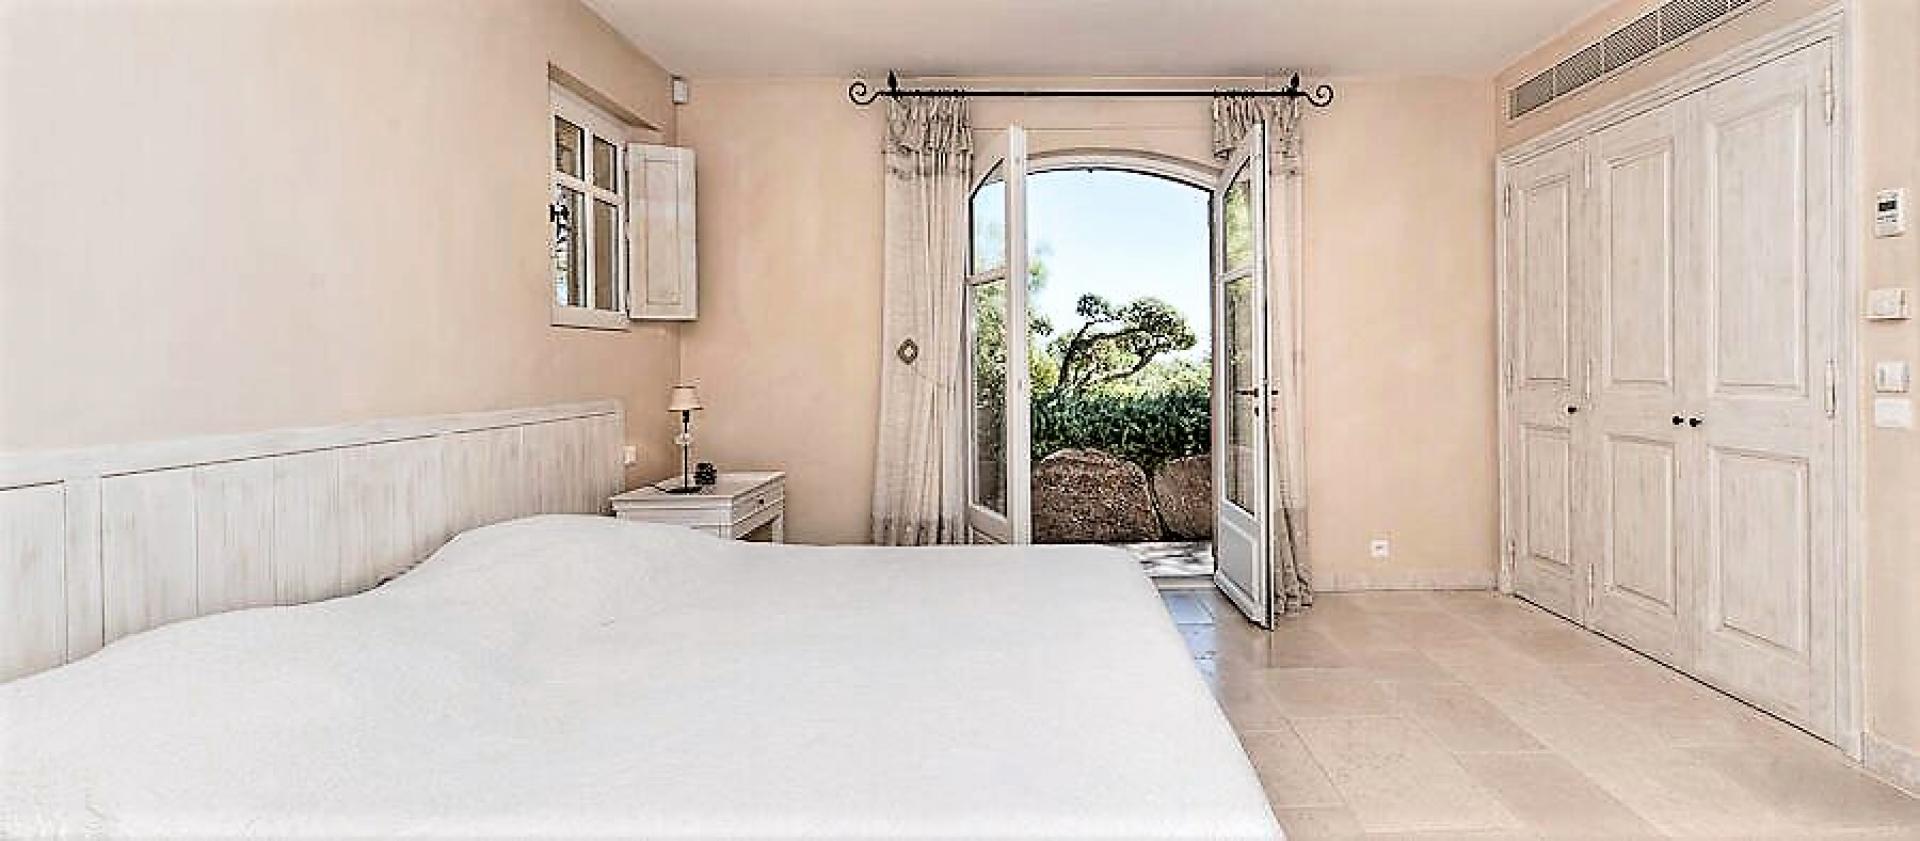 An en-suite bathroom and its views on the garden